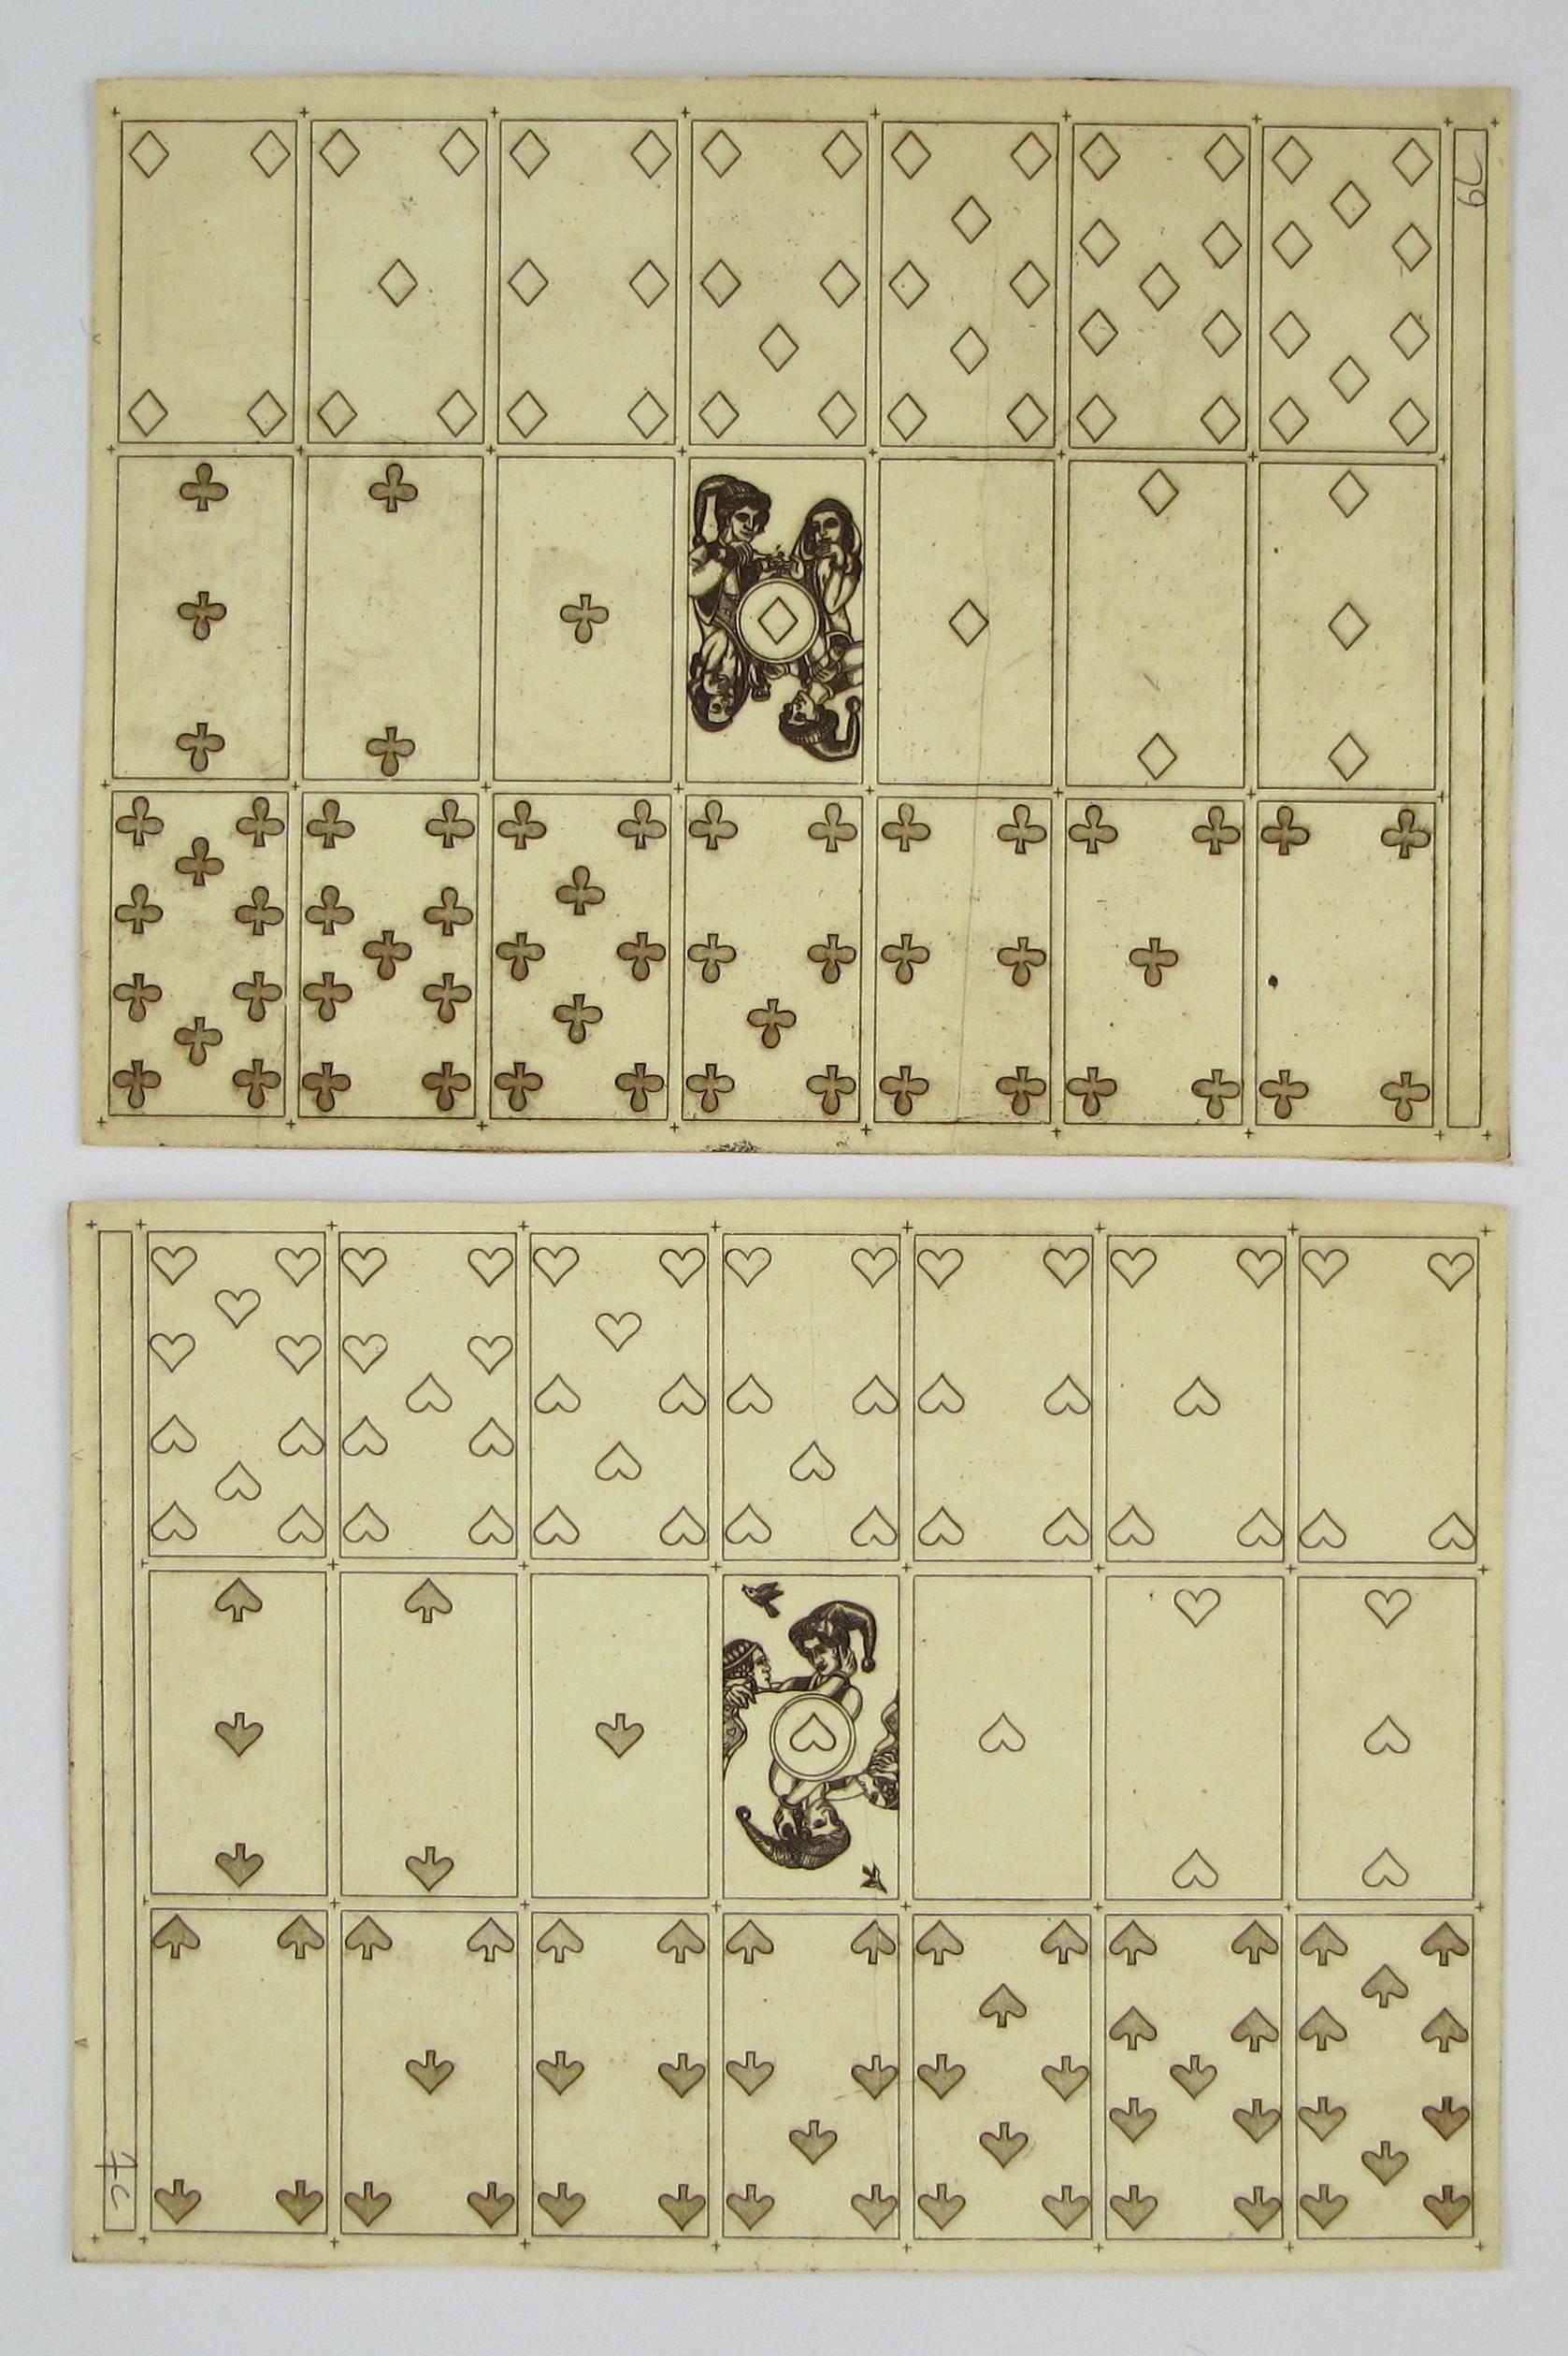 Merry Andrew No. 30, 1989 by Karl Gerich of Bath - Two Playing Card Print Sheets